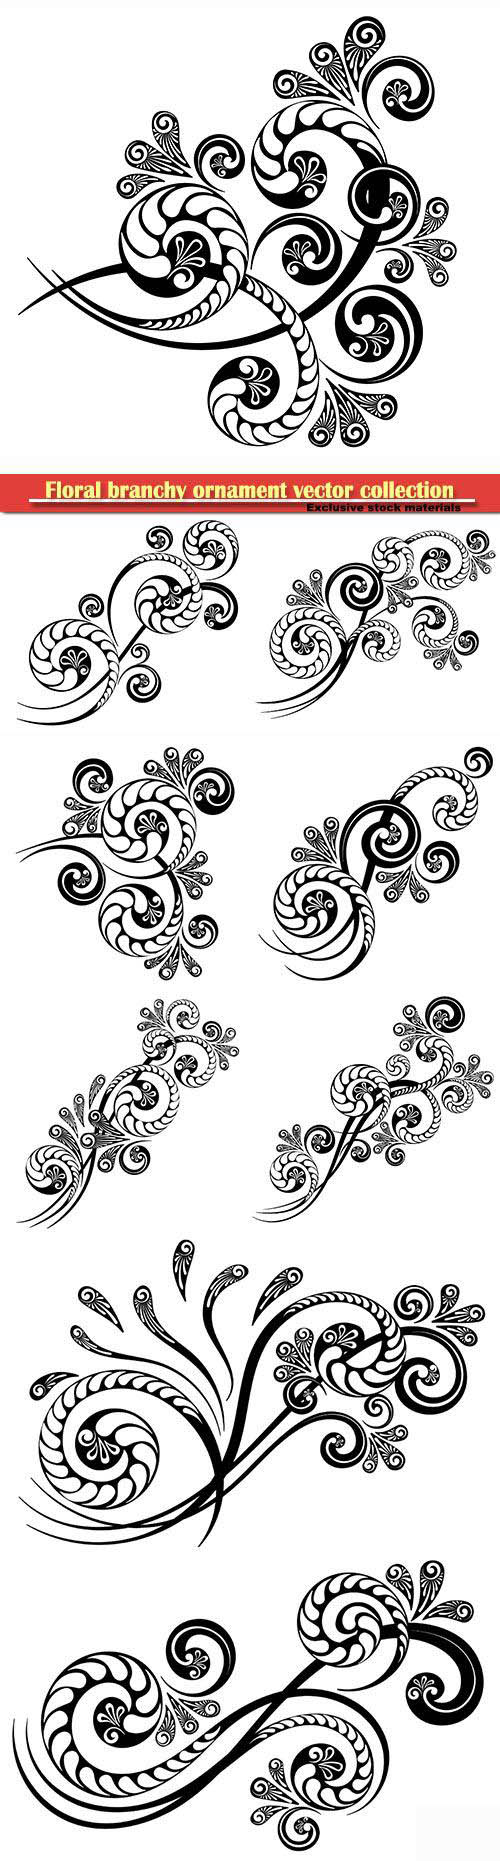 Floral branchy ornament with a beautiful complex pattern for decorative design of invitations, lette...